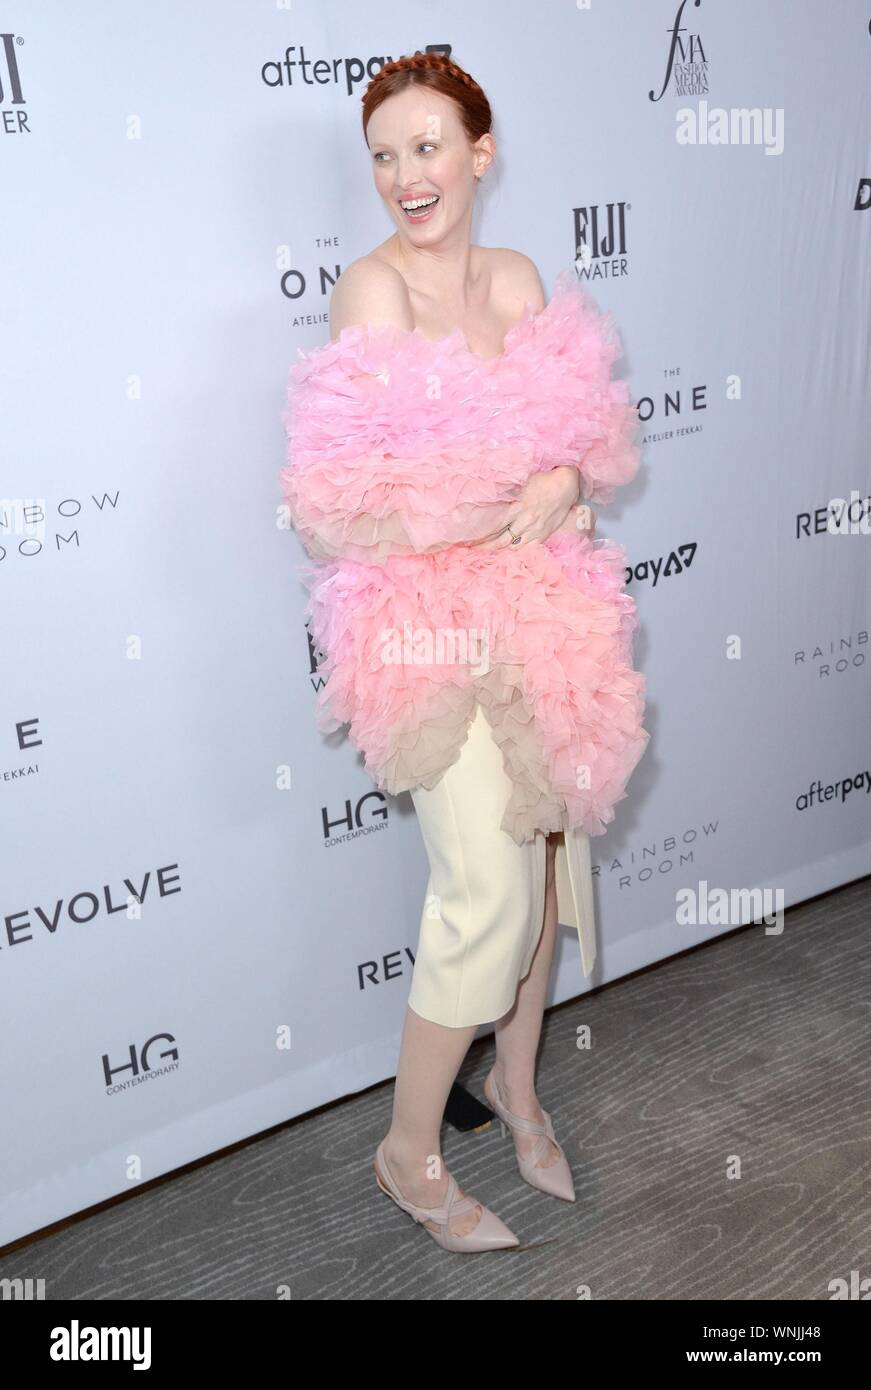 New York, NY, USA. 5th Sep, 2019. Karen Elson at arrivals for The Daily Front Row 7th Annual Fashion Media Awards, Rainbow Room at Rockefeller Center, New York, NY September 5, 2019. Credit: Kristin Callahan/Everett Collection/Alamy Live News Stock Photo